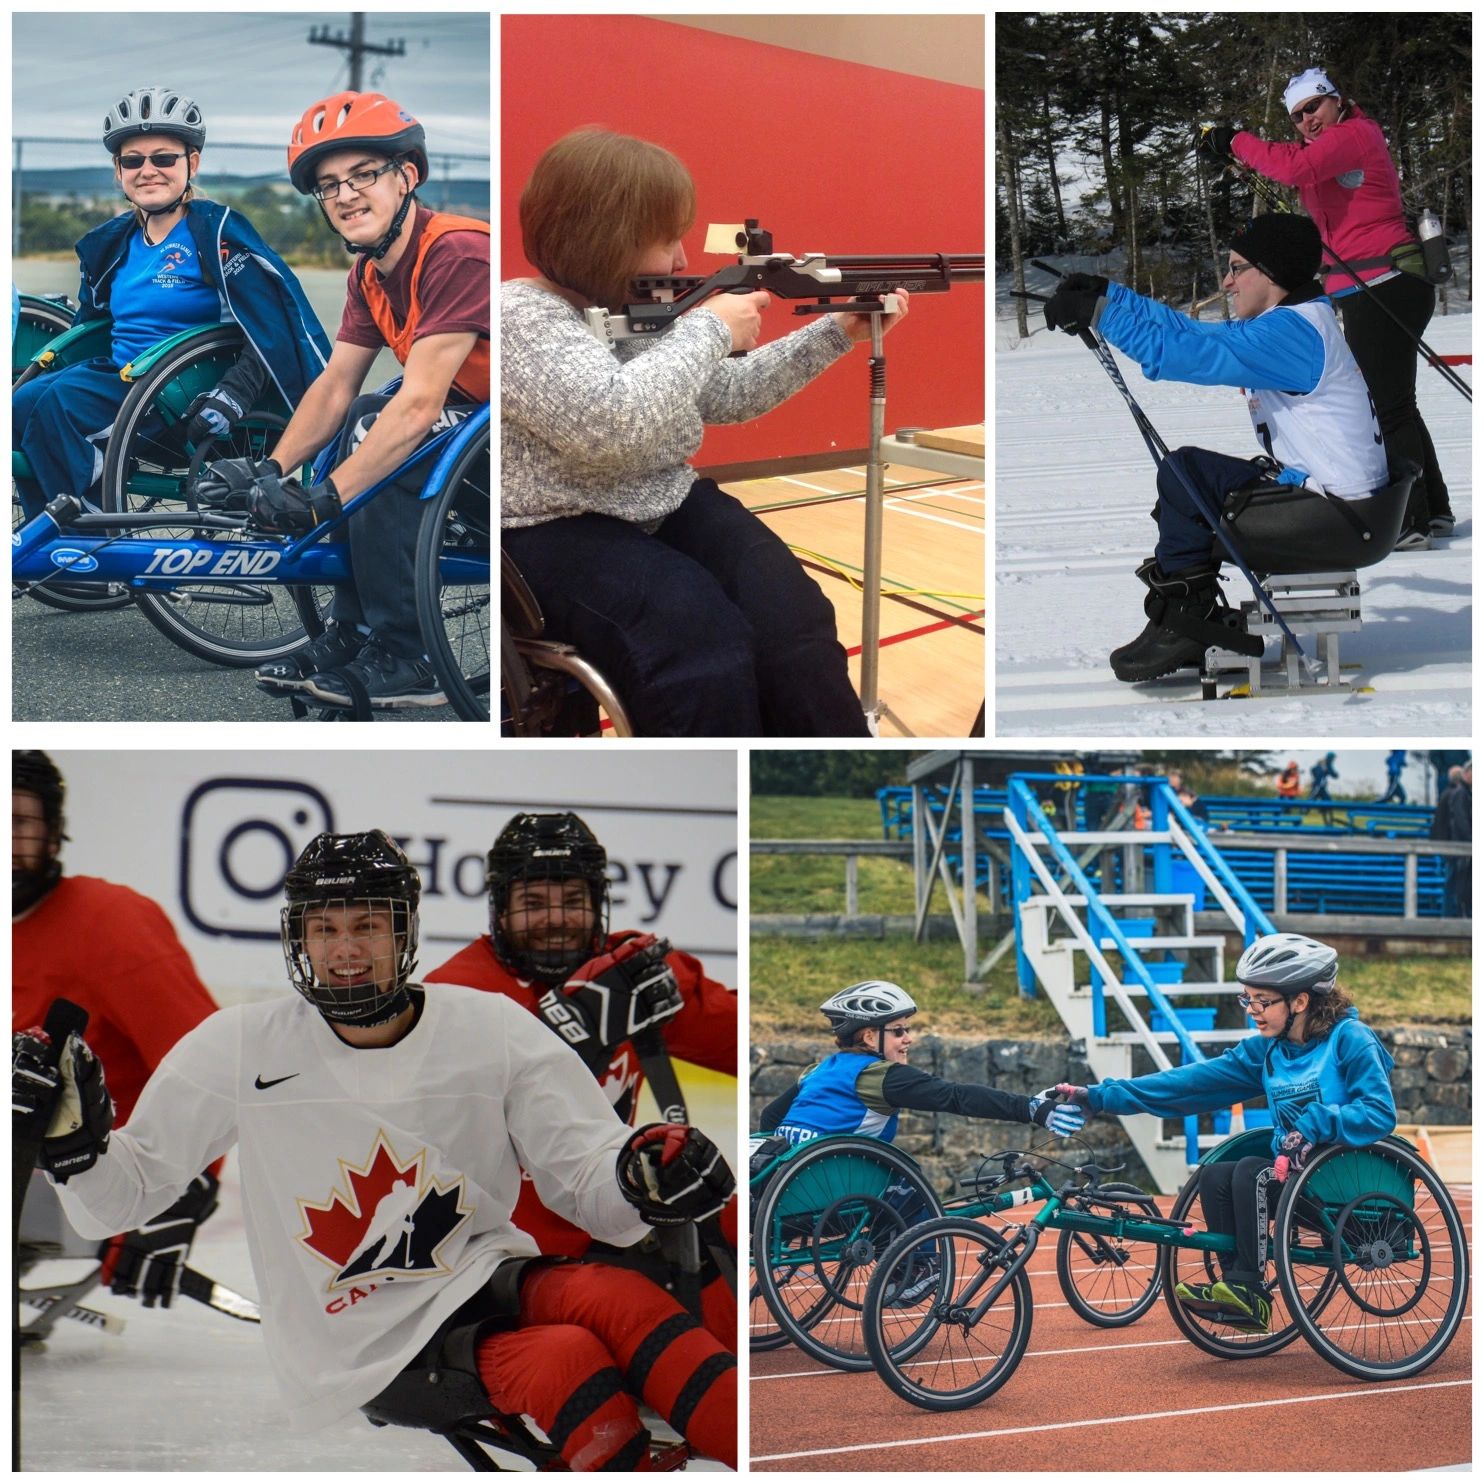 Athletes participating in para sports including: wheelchair racing, shooting, skiing and hockey.